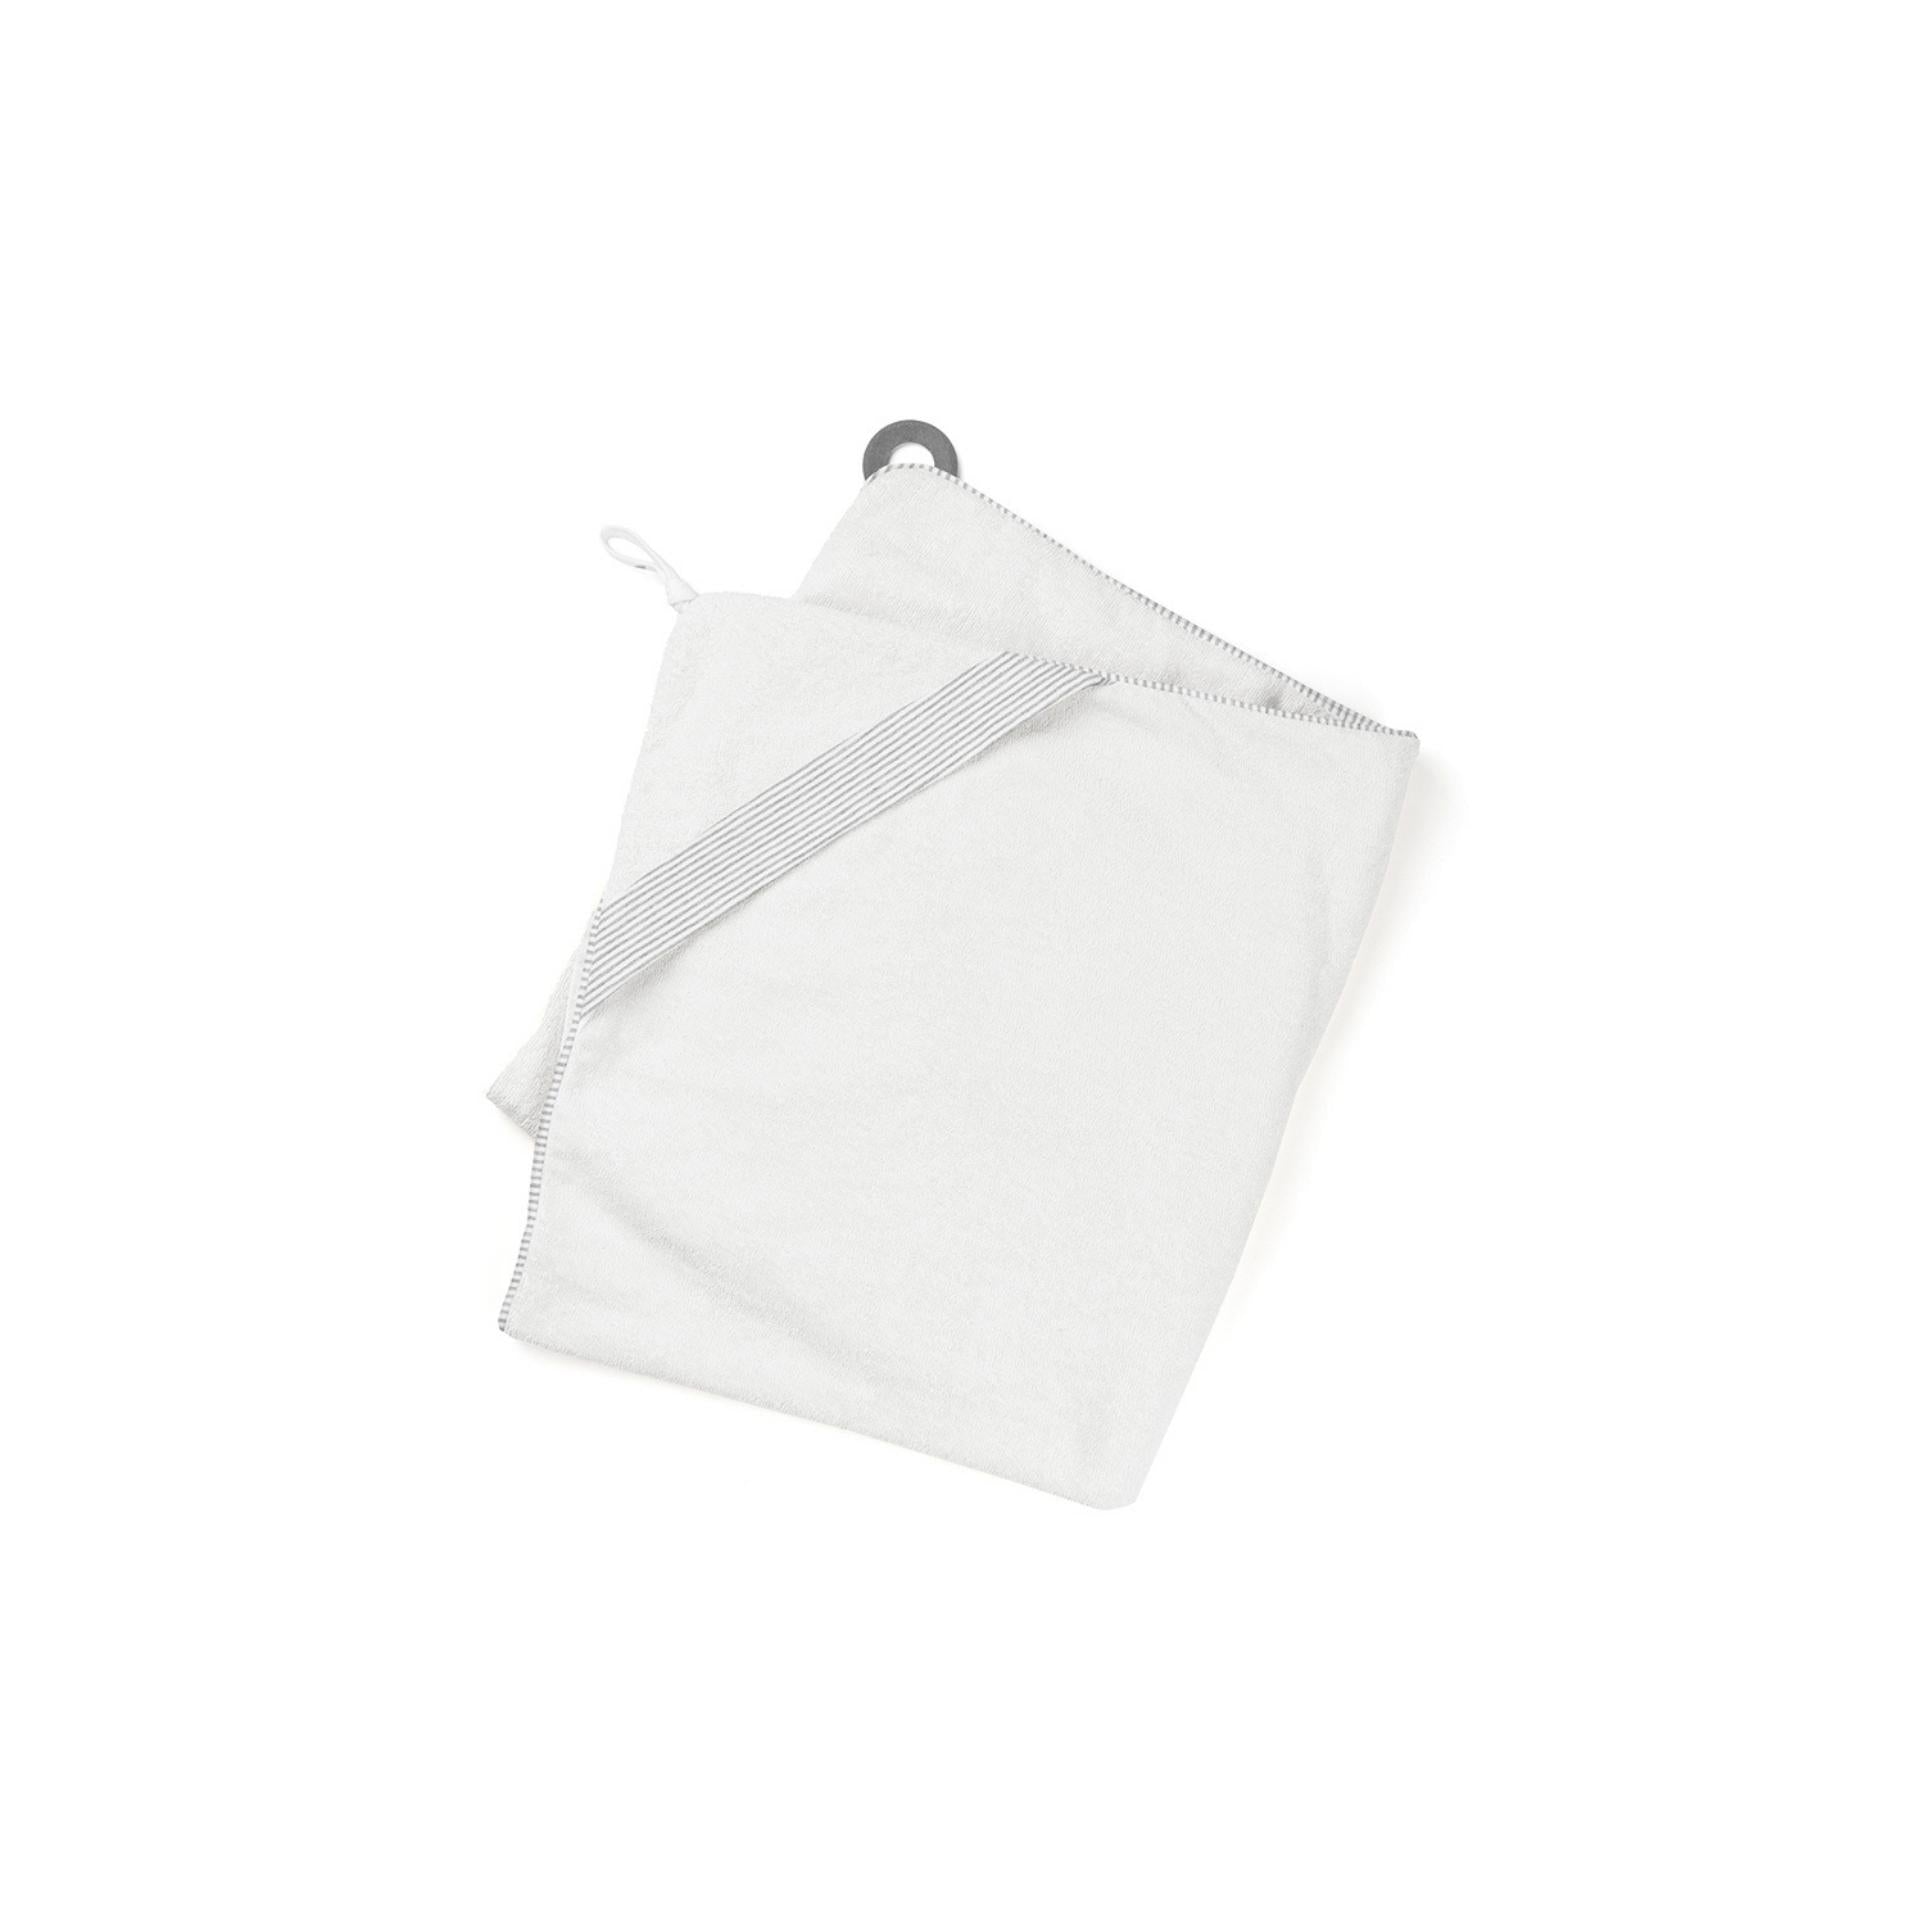 doomoo Dry'n play - Large White Baby Bath Cape with attach on the back to avoid water splashes